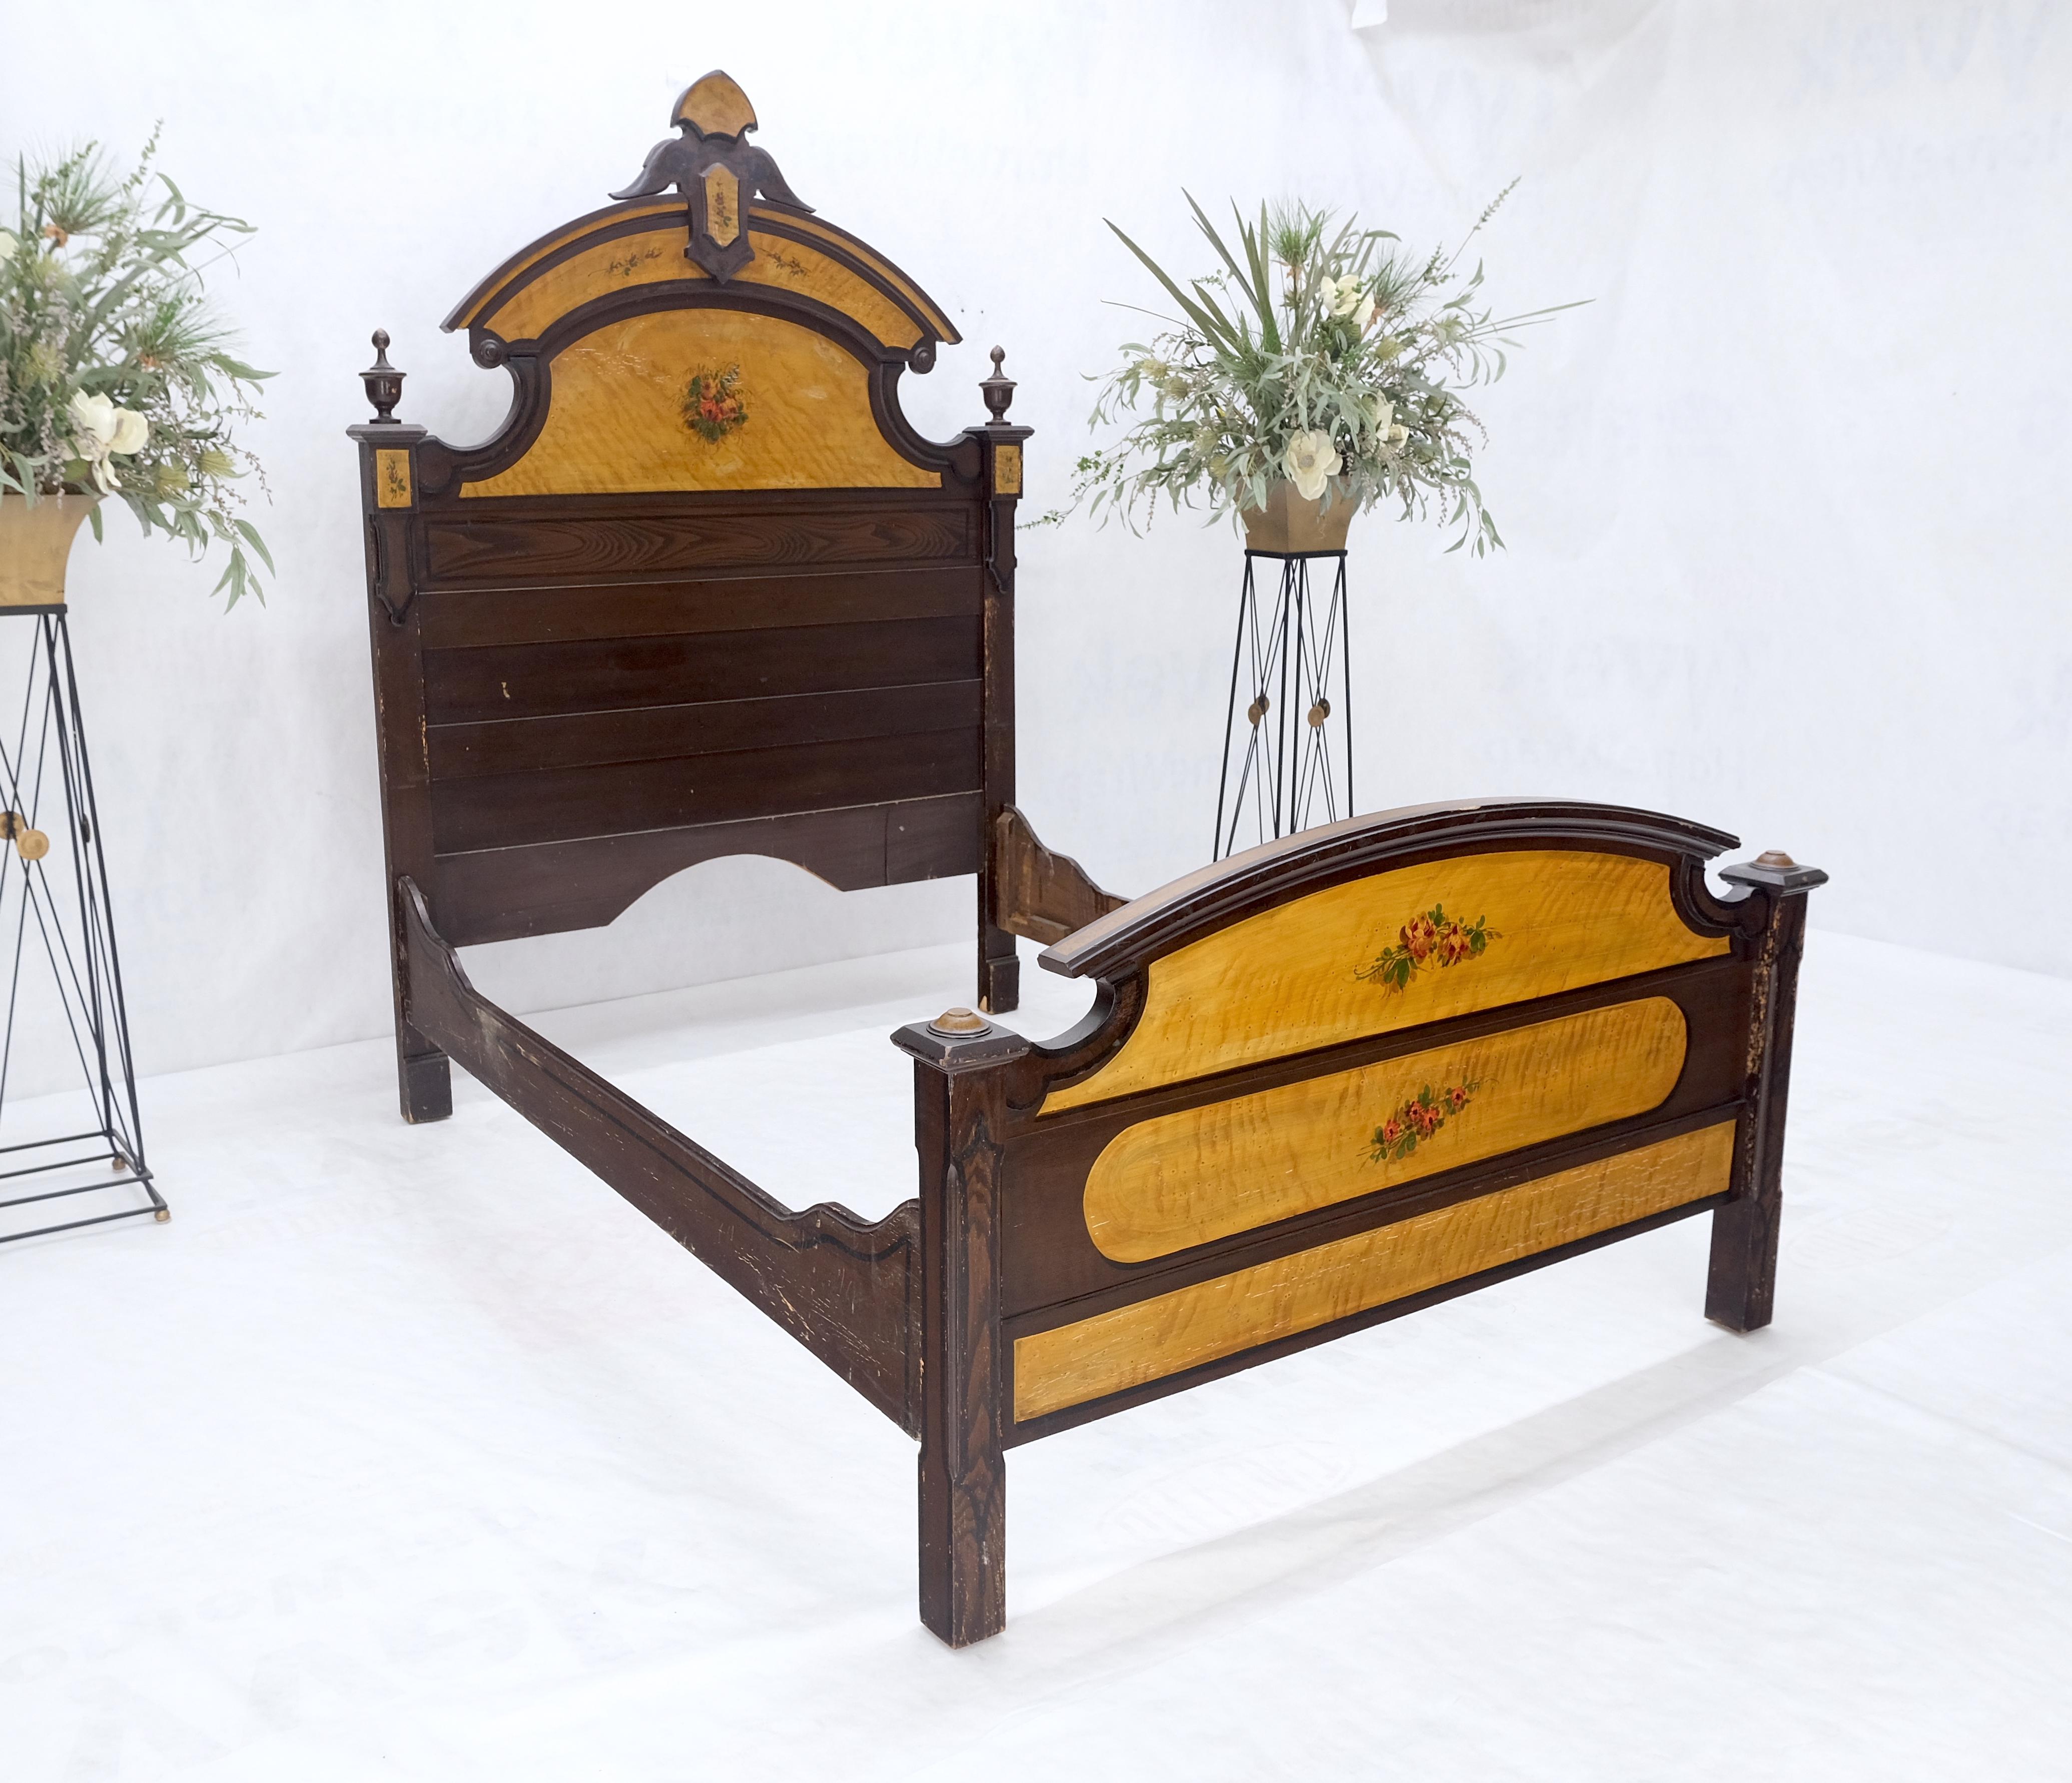 5 Piece Victorian Painted Bedroom Dresser Mirror King Bed Headboard Rocking Chair Set  
Dimensions:
High Dresser: 18inx38inx80in
Low Dresser: 15inx32inx37in
Rocking Chair: 28inx17inx36in seat: 16.5in
Legged Chair: 17inx17inx33in seat: 17.5in
Bed